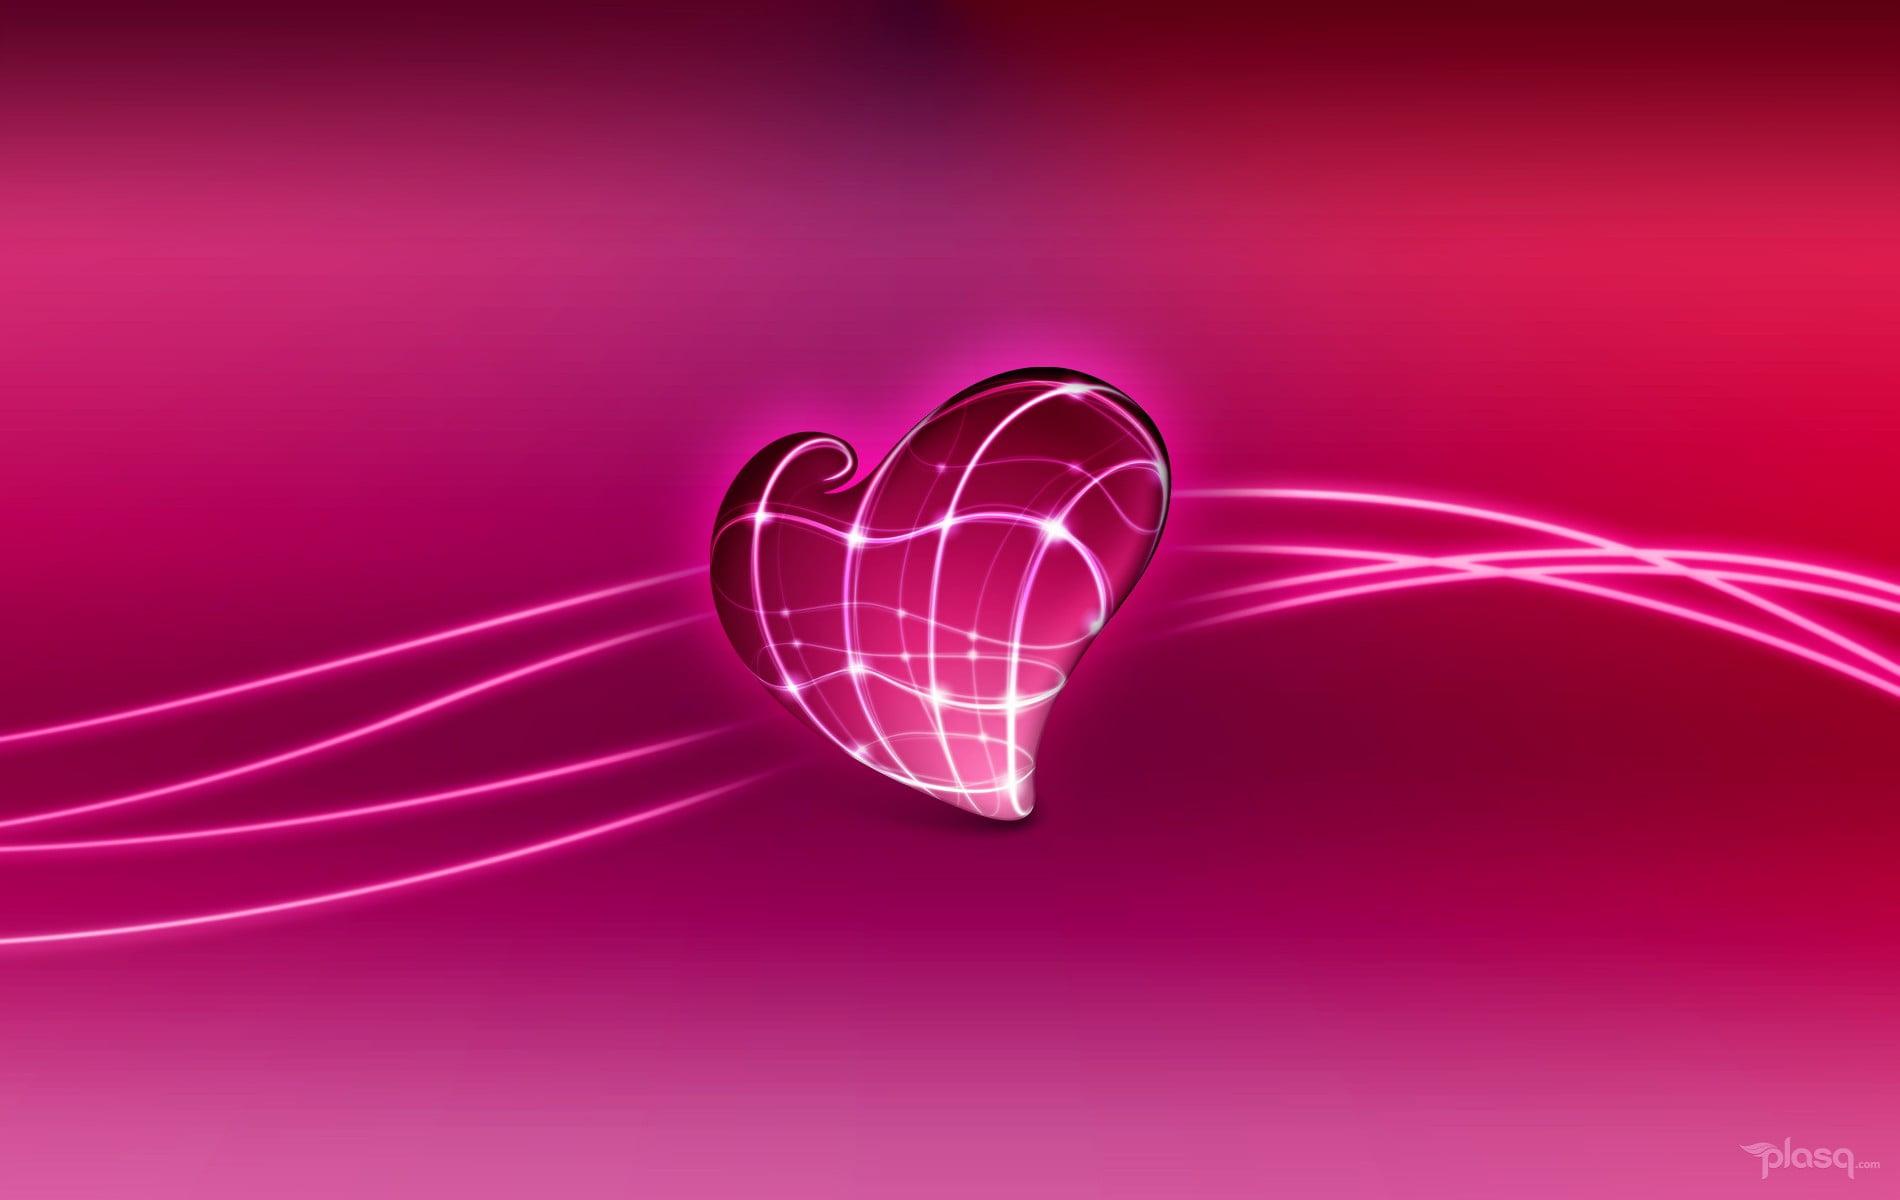 HD wallpaper: red and white LED light, pink, heart shape, love